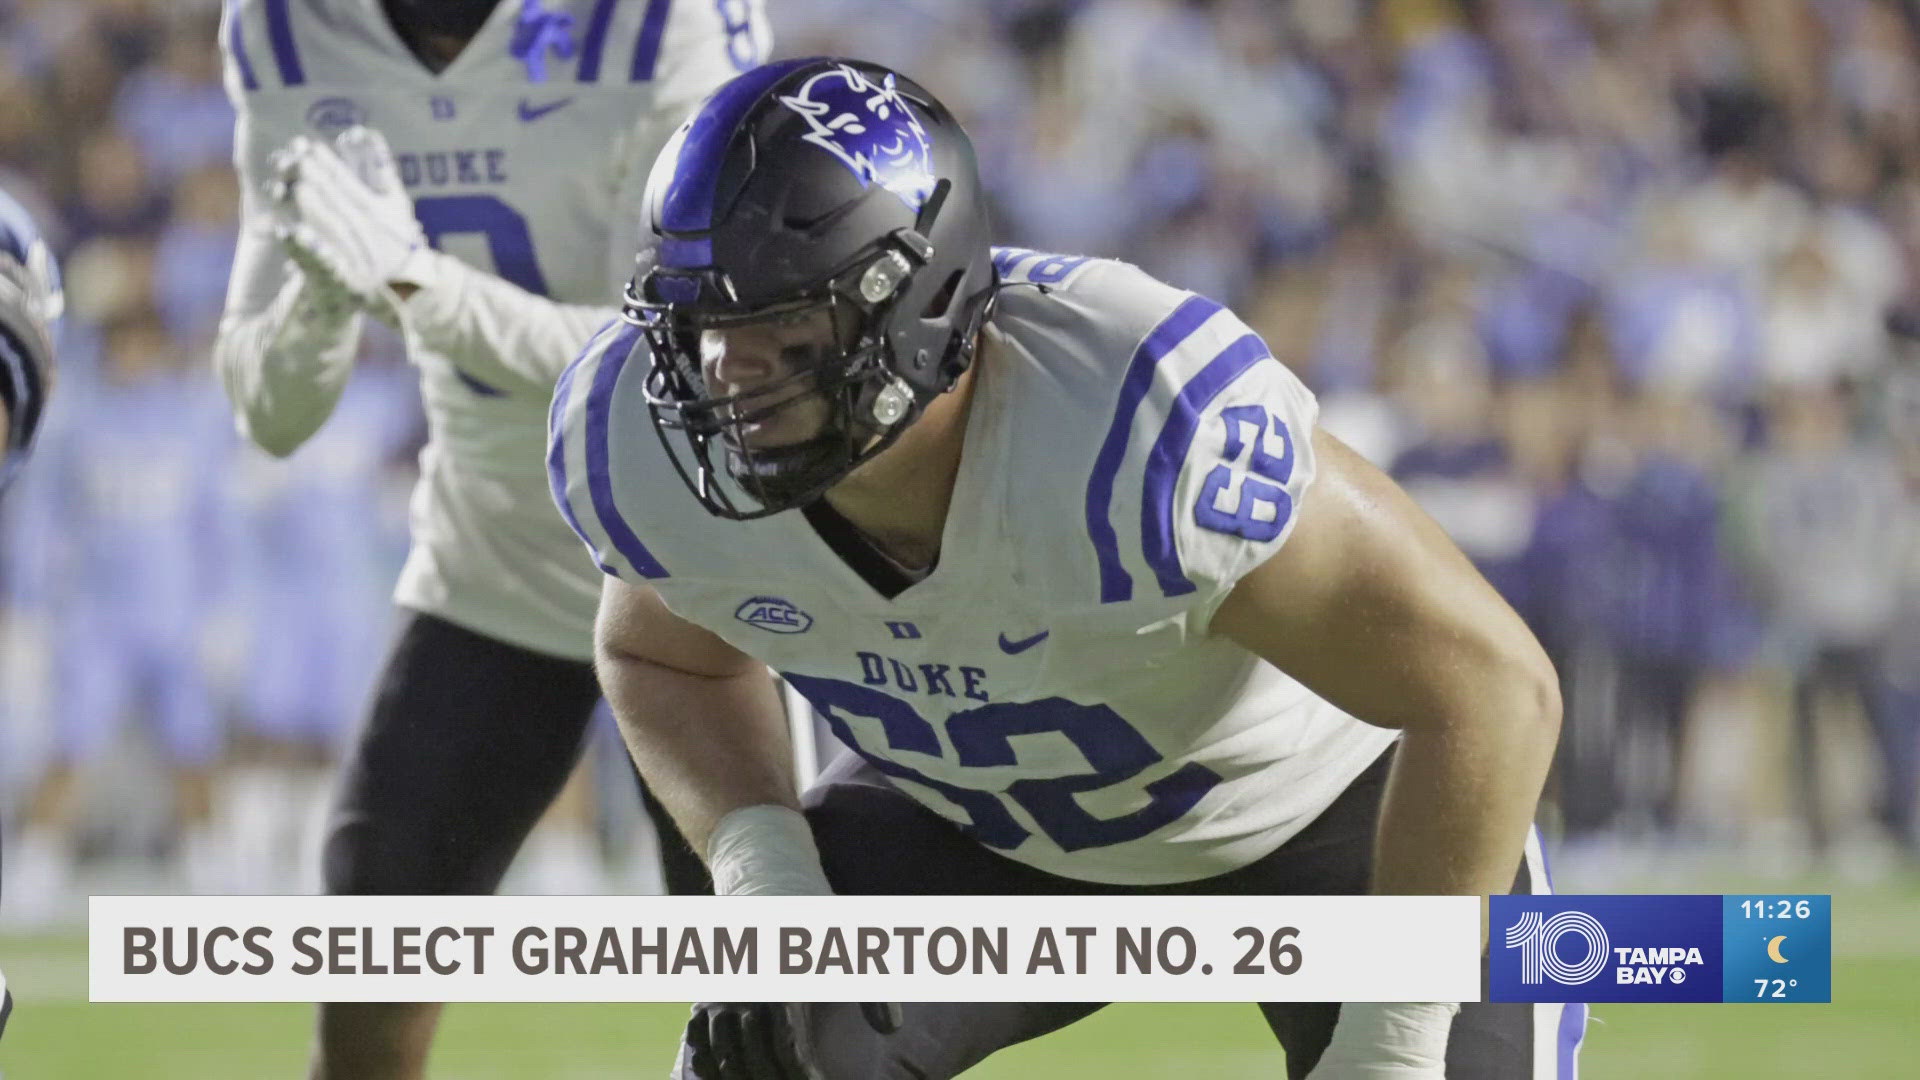 The Bucs selected Graham Barton, a center from Duke.